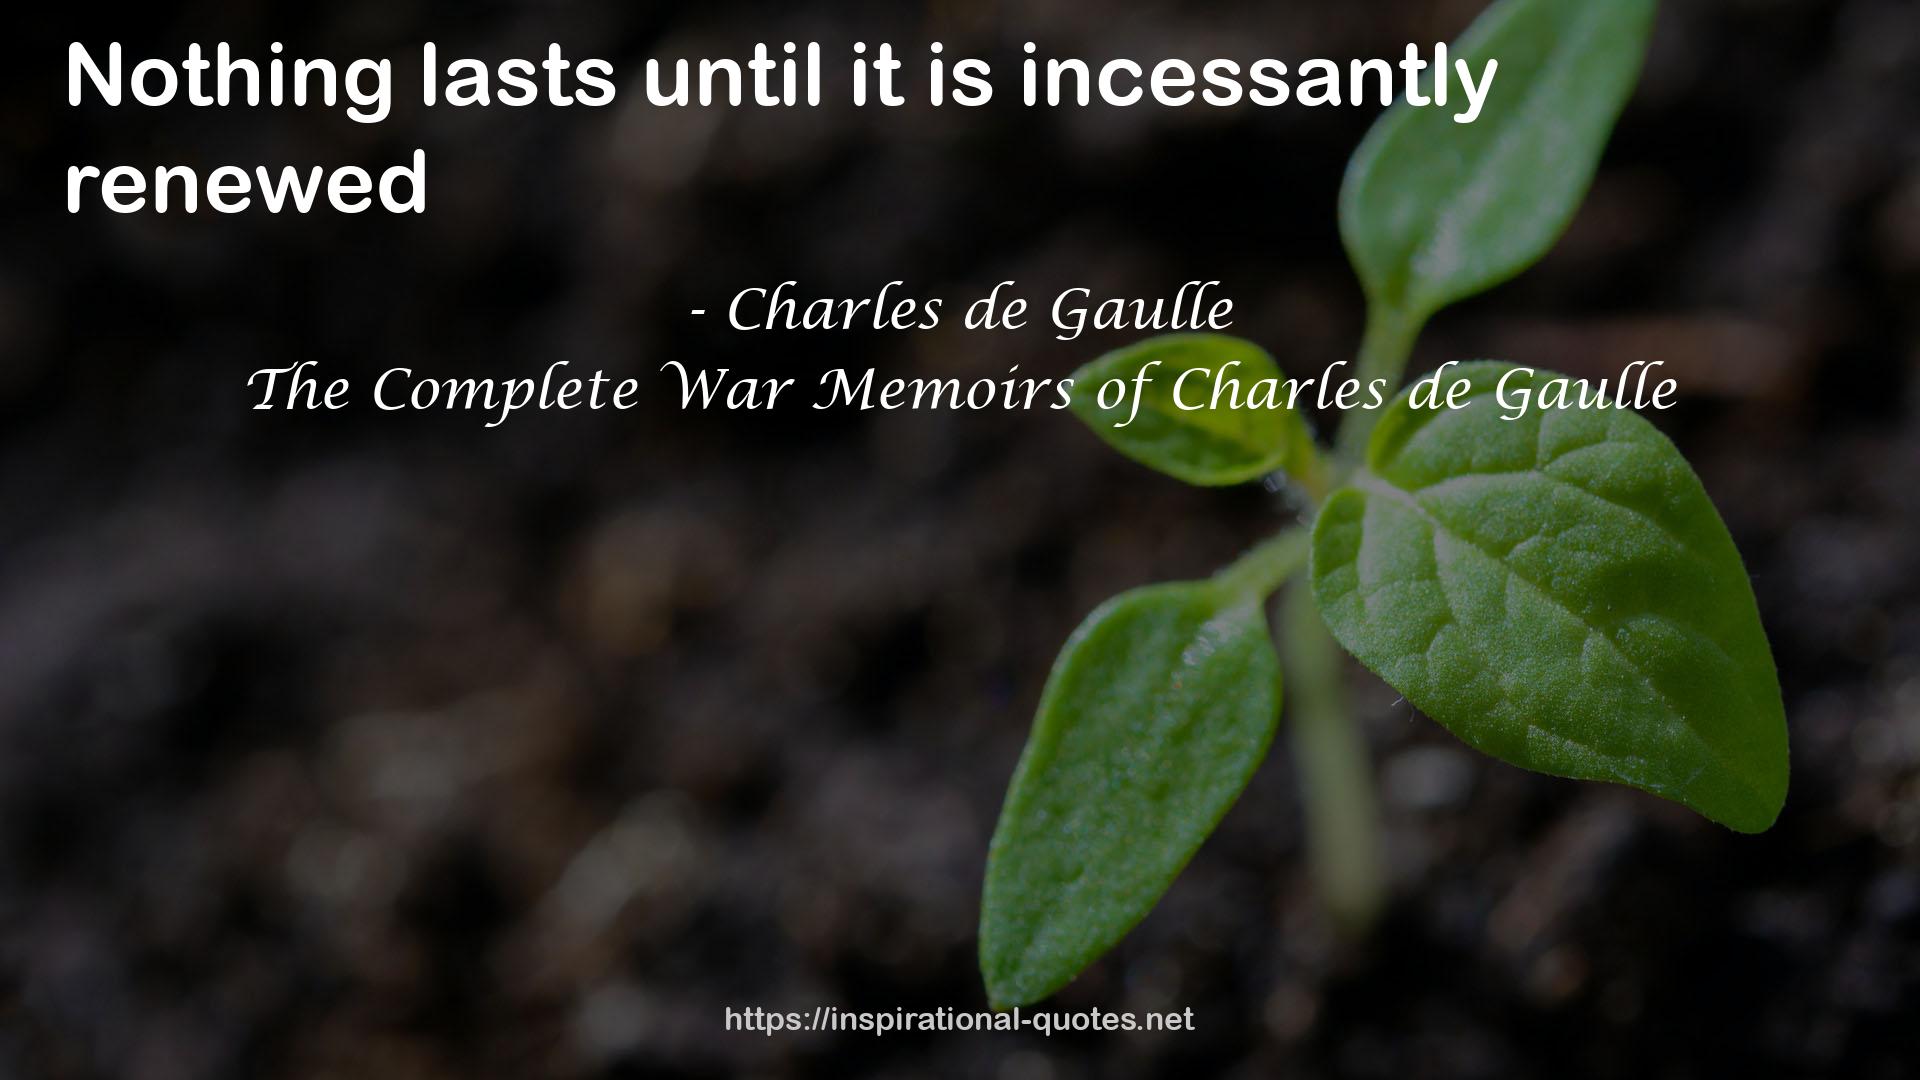 The Complete War Memoirs of Charles de Gaulle QUOTES